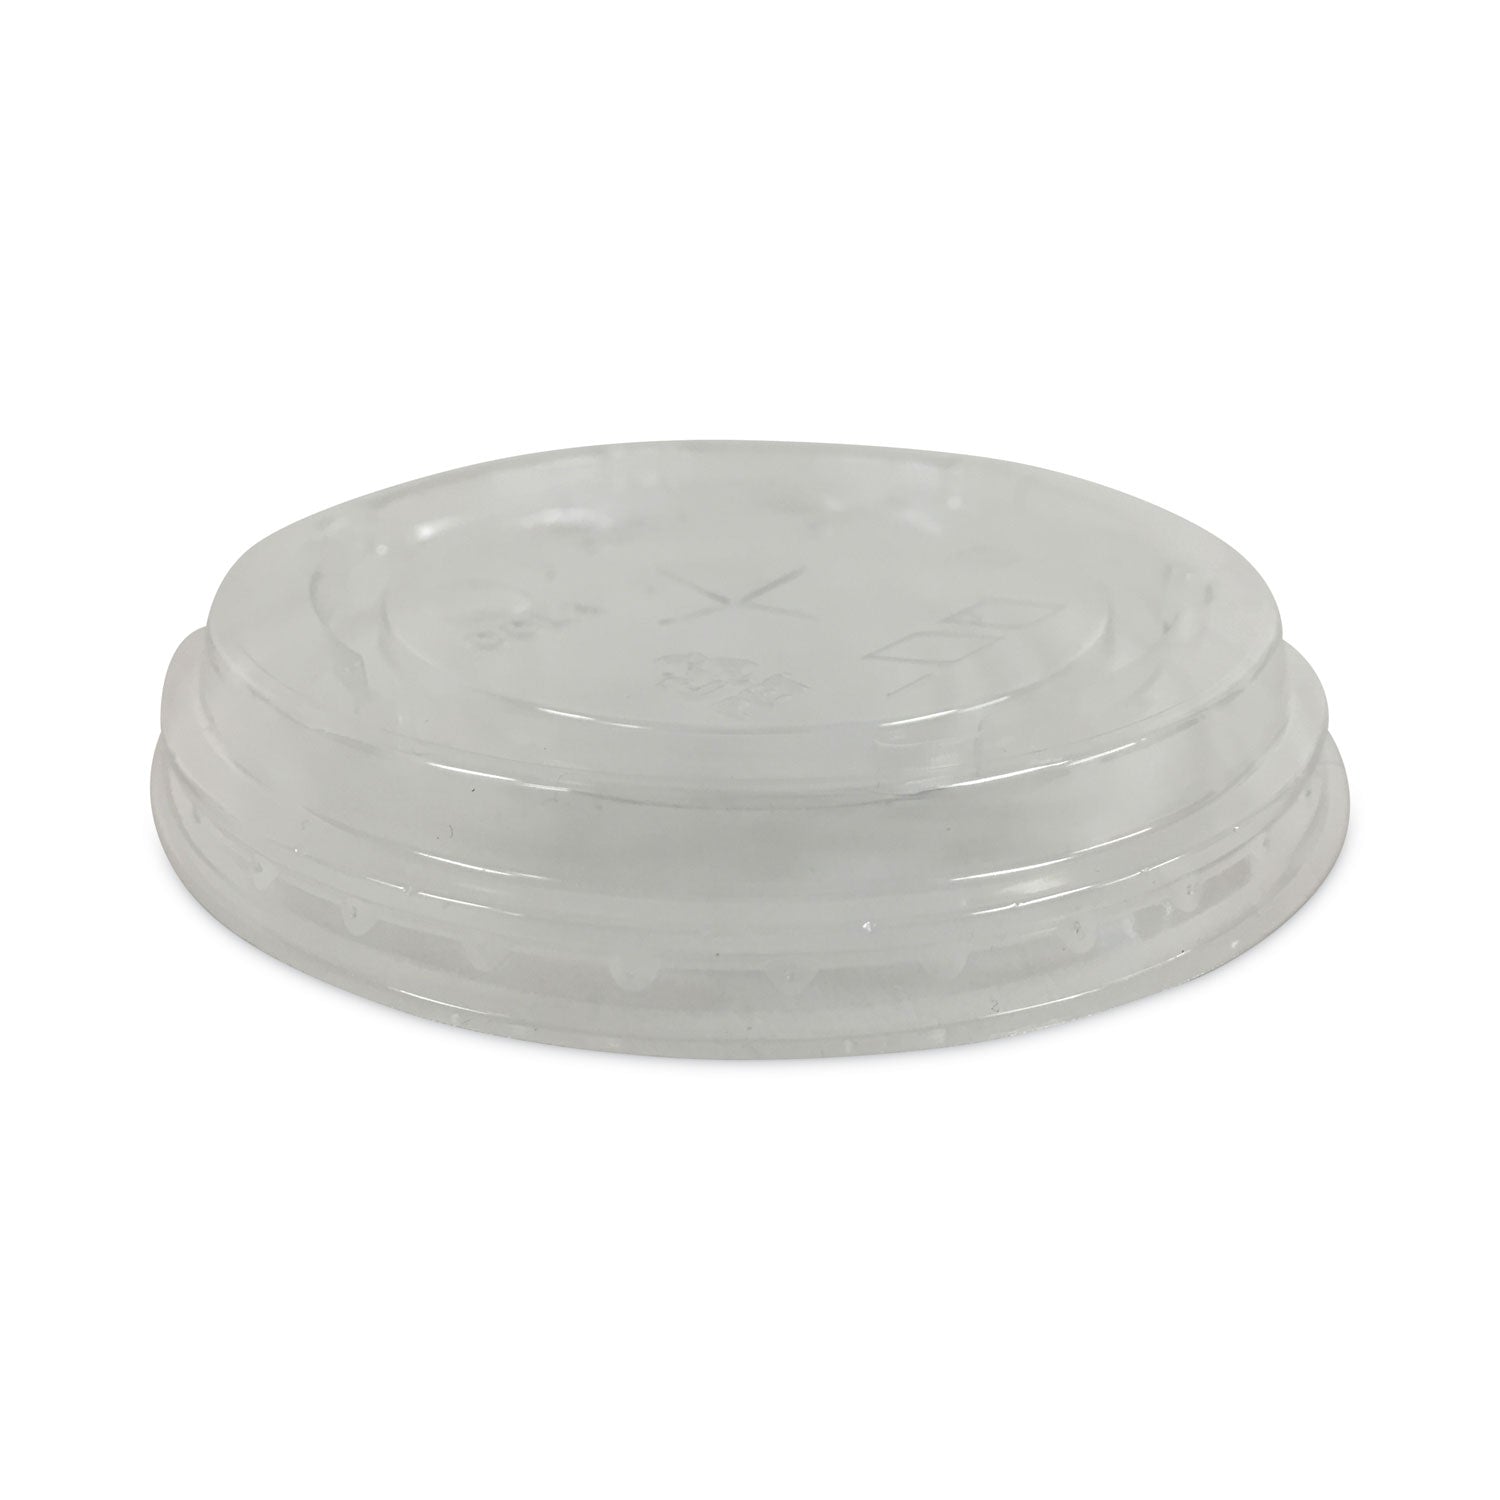 plastic-cold-cup-lids-fits-12-oz-to-20-oz-cups-clear-1000-carton_syd00320c - 3